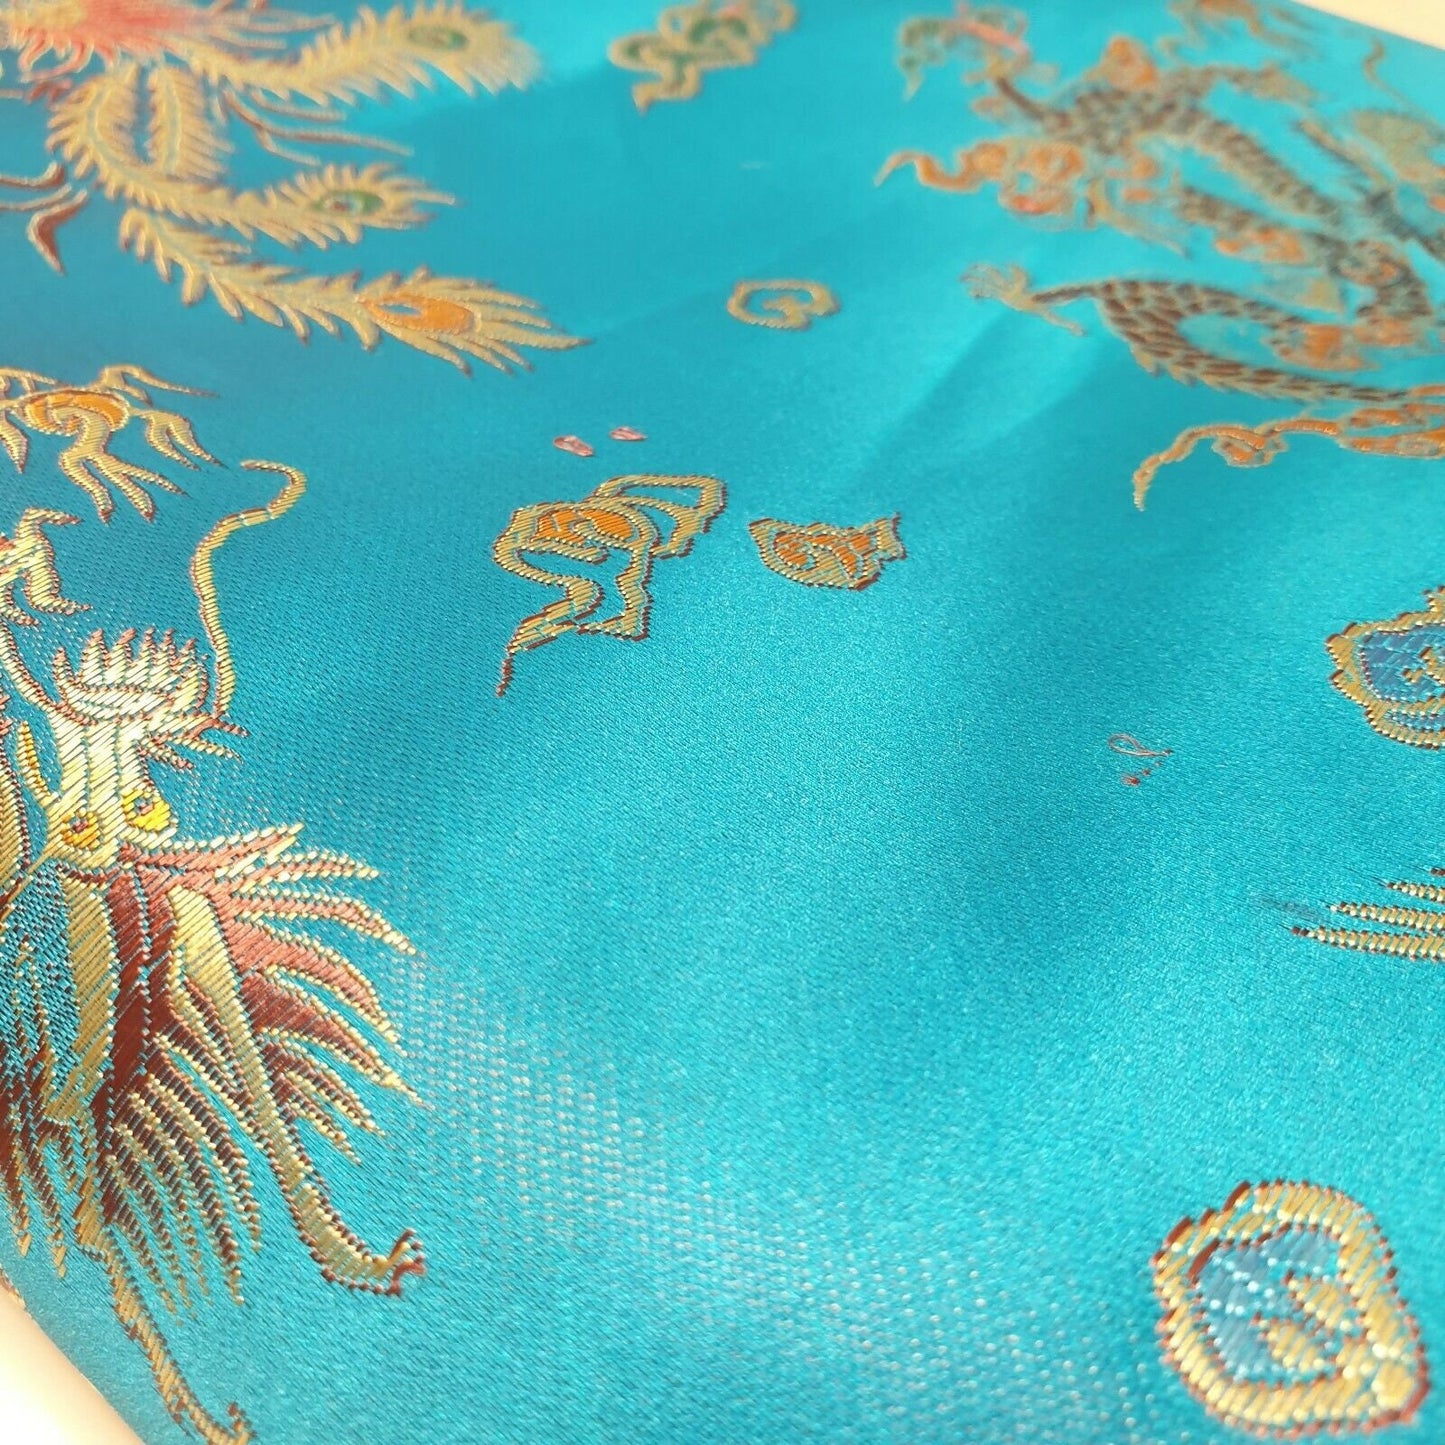 Traditional Chinese Embroidered Brocade Poly Silky Satin Oriental Dragon Print By the Meter (Turquoise)